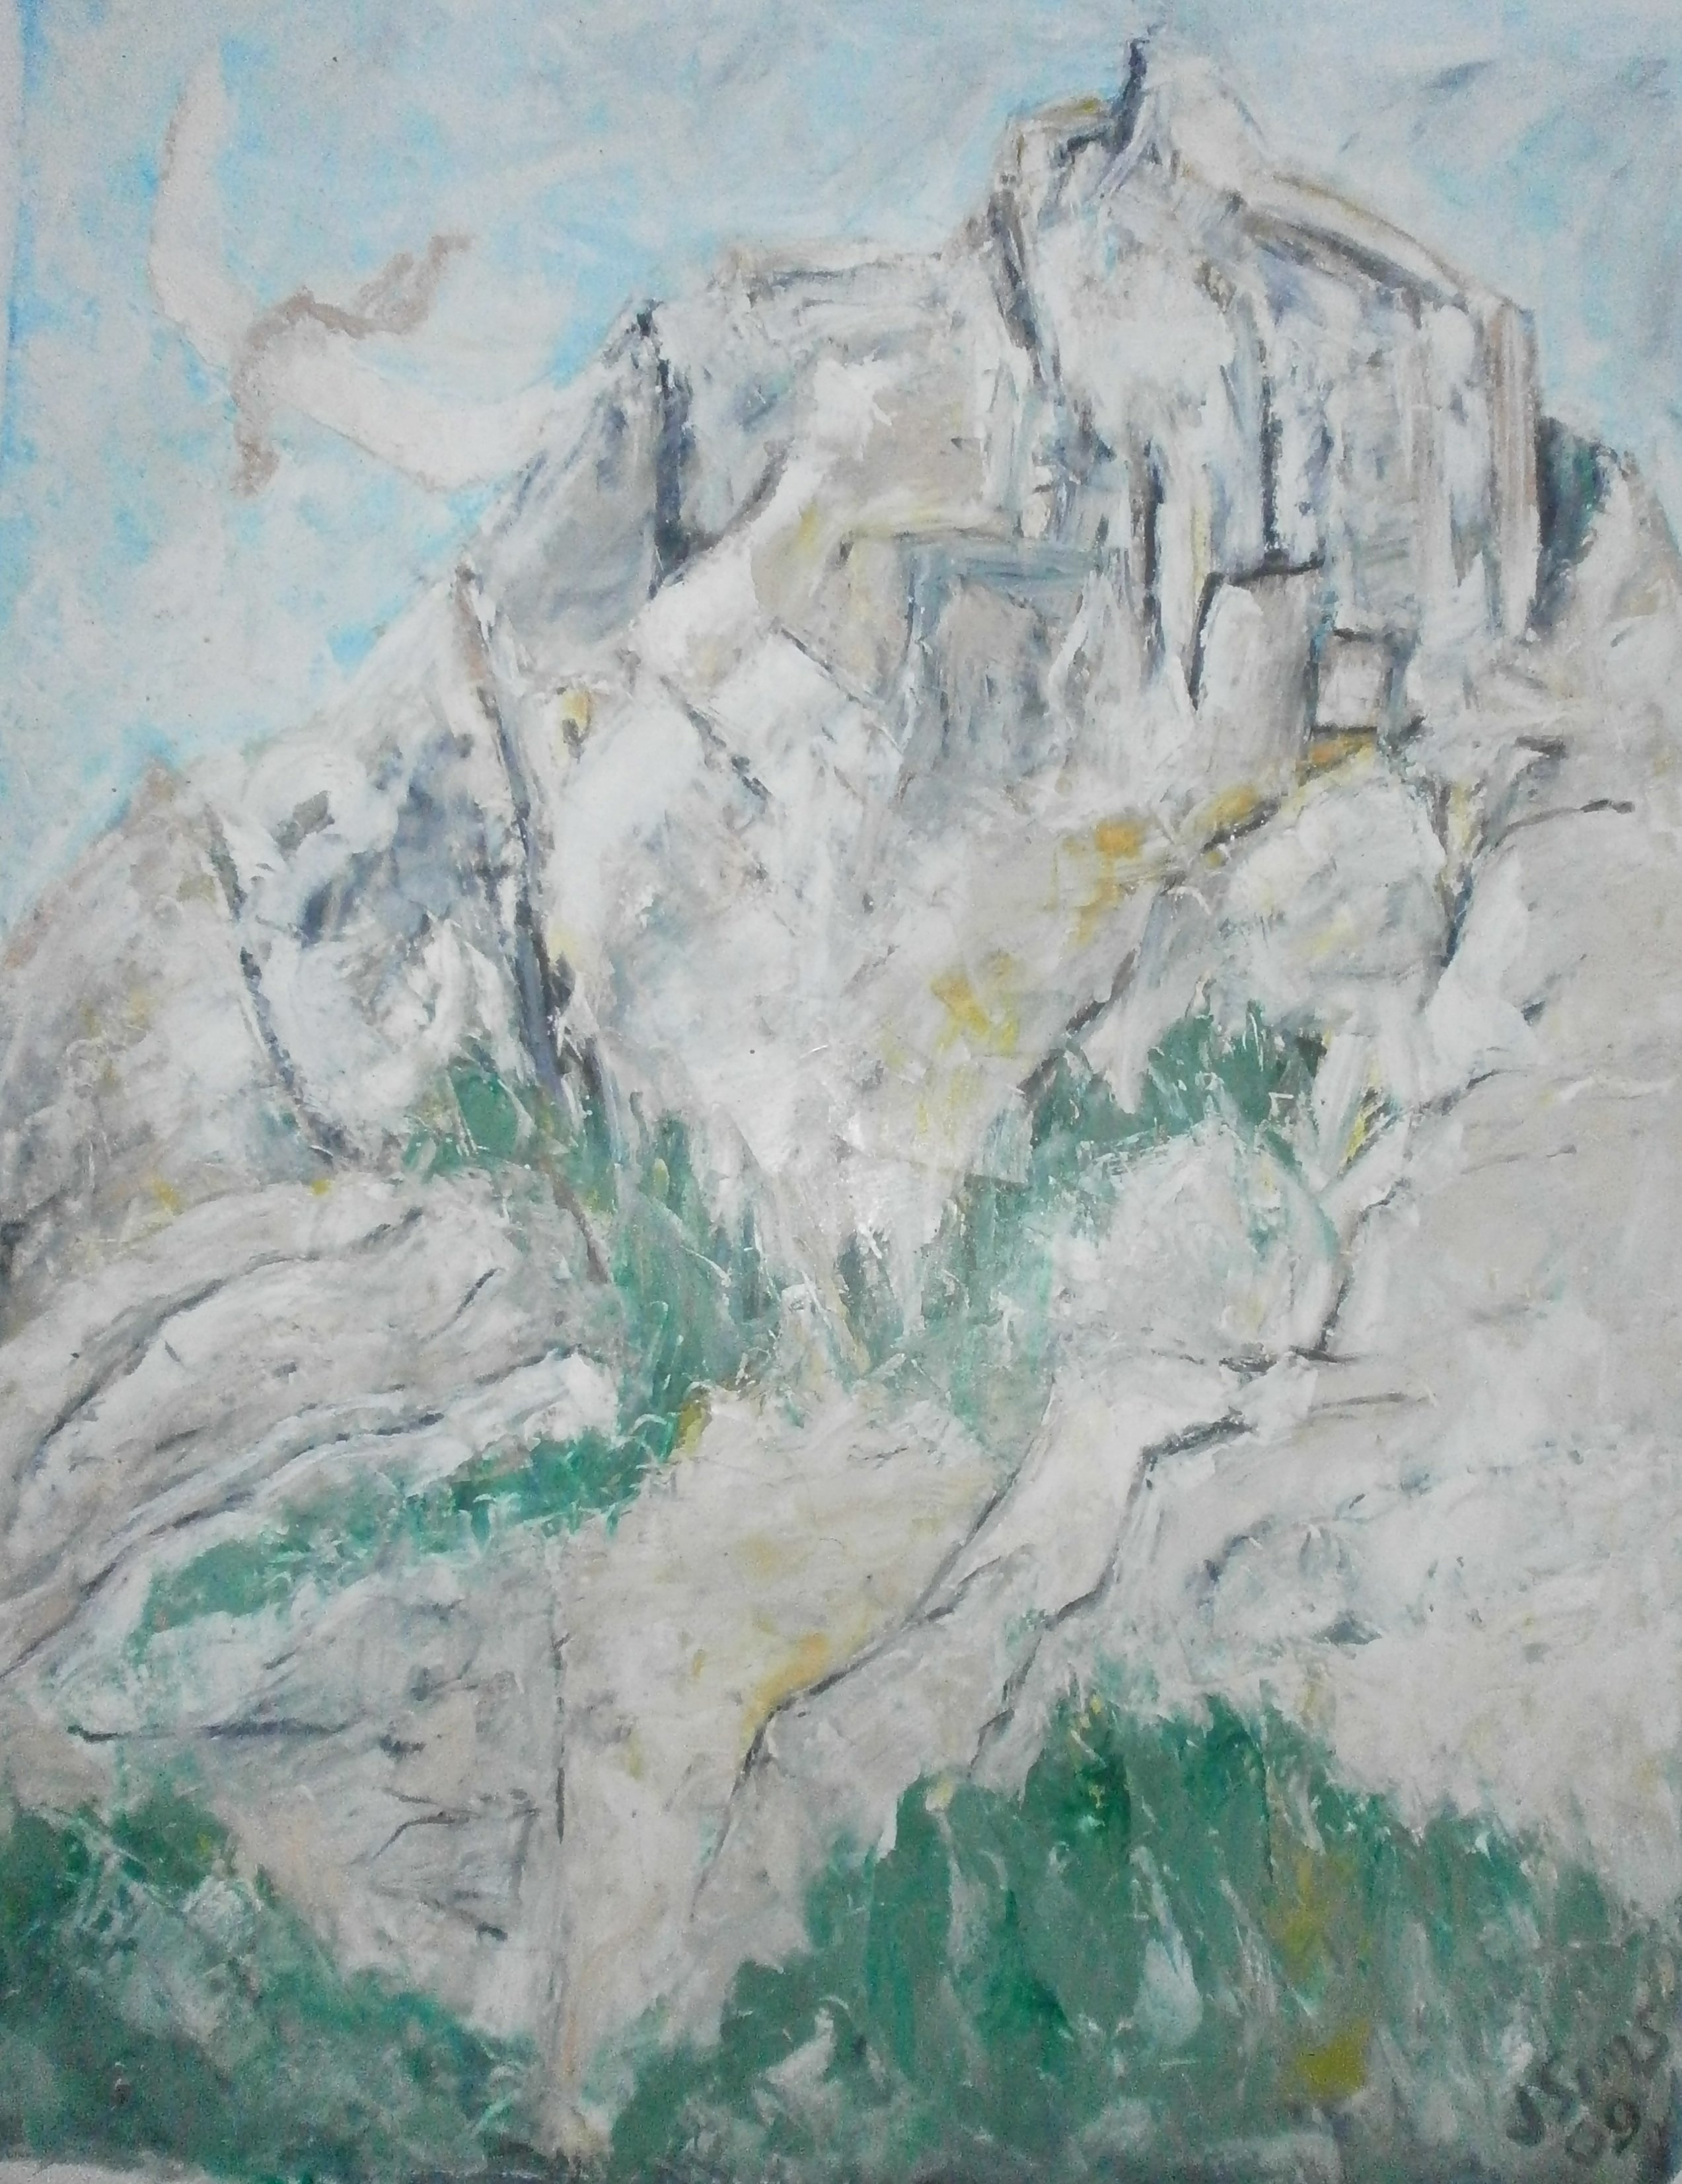 John Sims: 'icarus in switzerland', 2009 Oil Pastel, Landscape. In summer 2009 I was invited to represent Cyprus at a stone carving symposium in the mountain village of Vattis in Switzerland. When not carving I made drawings of the beautiful landscape all around me. The village is situated in a deep river valley with high mountains on all sides. ...